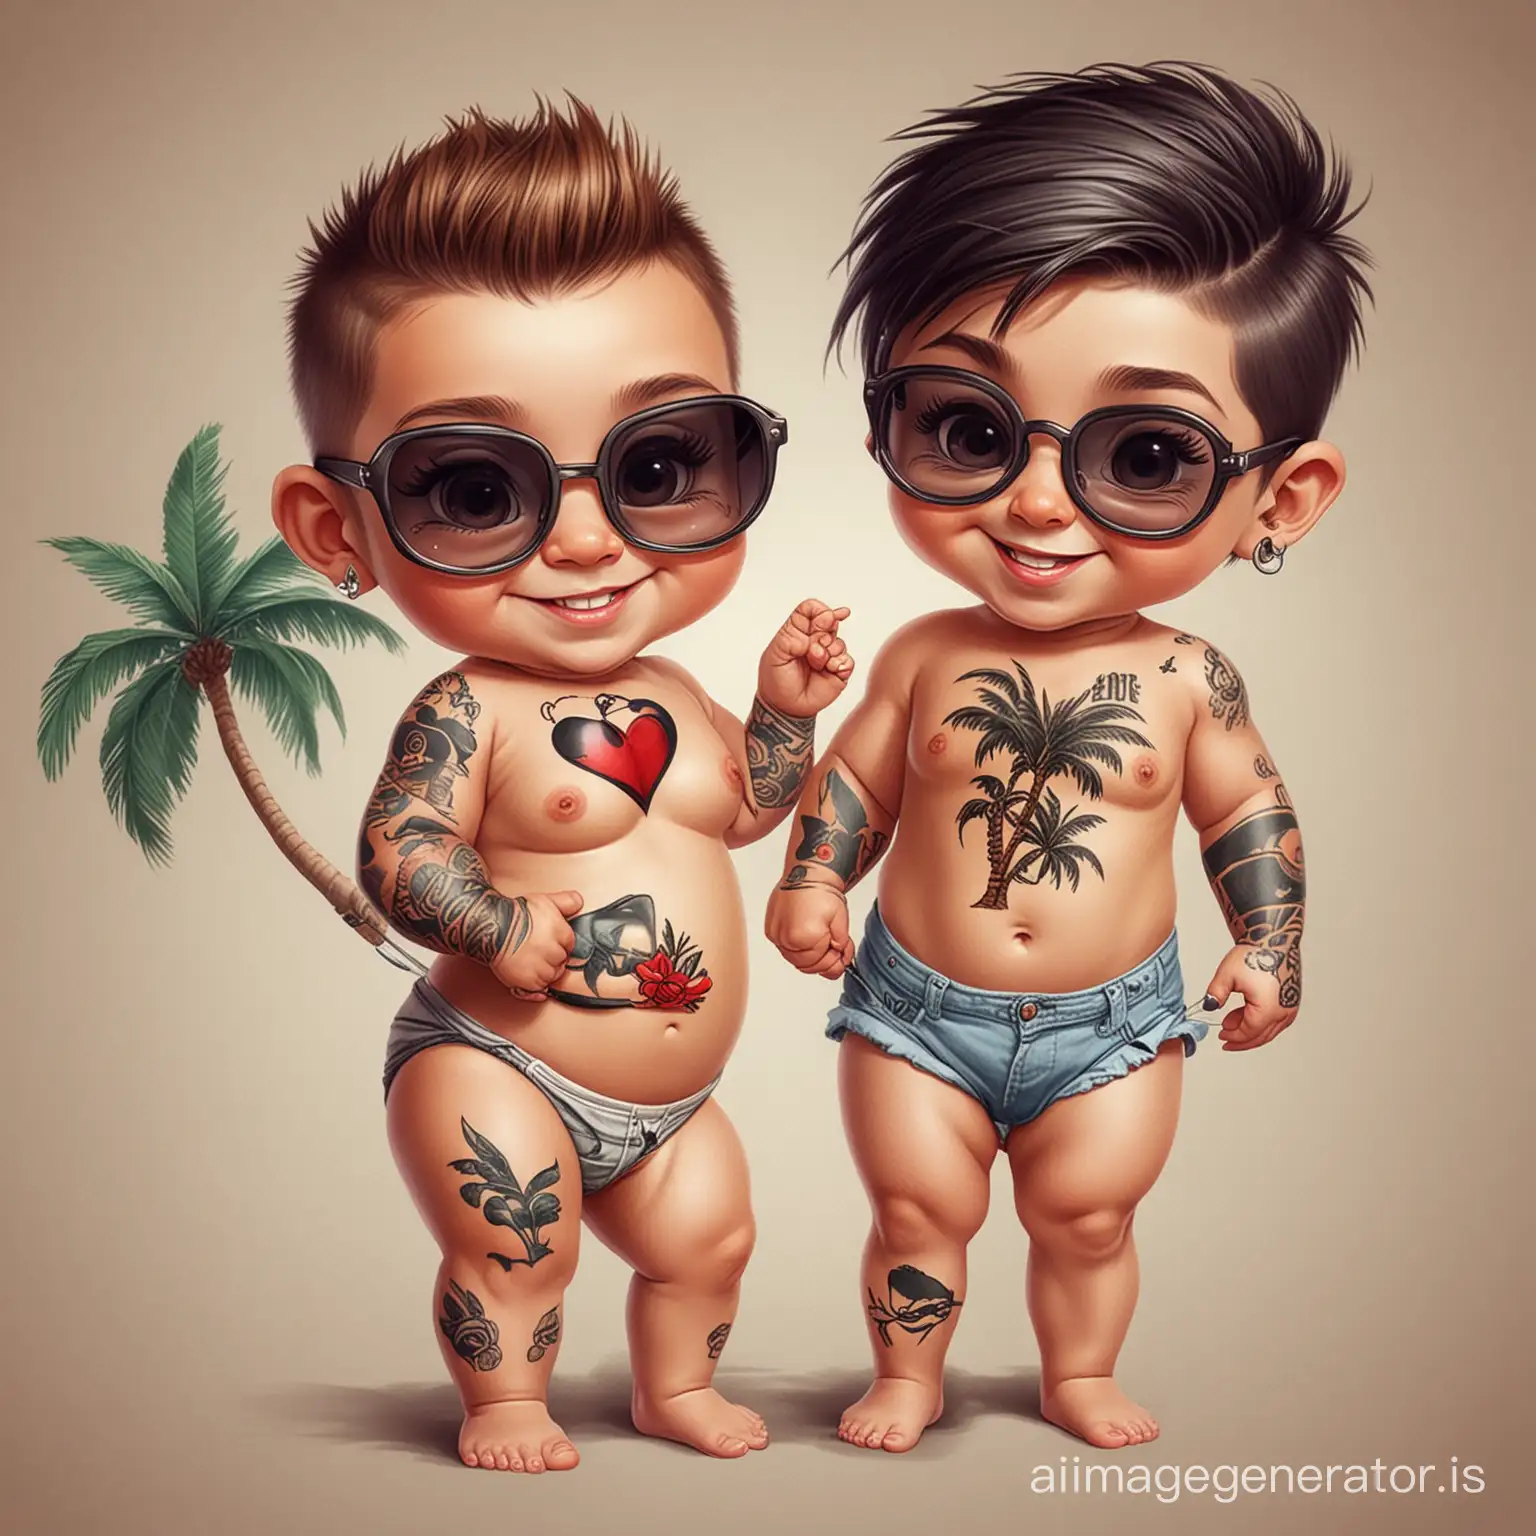 funny boy and girl with smiles, babies in diapers with black sunglasses and tattoos, the boy has a palm tree tattoo on his arm and the girl has a heart pierced by an arrow in the cartoon version